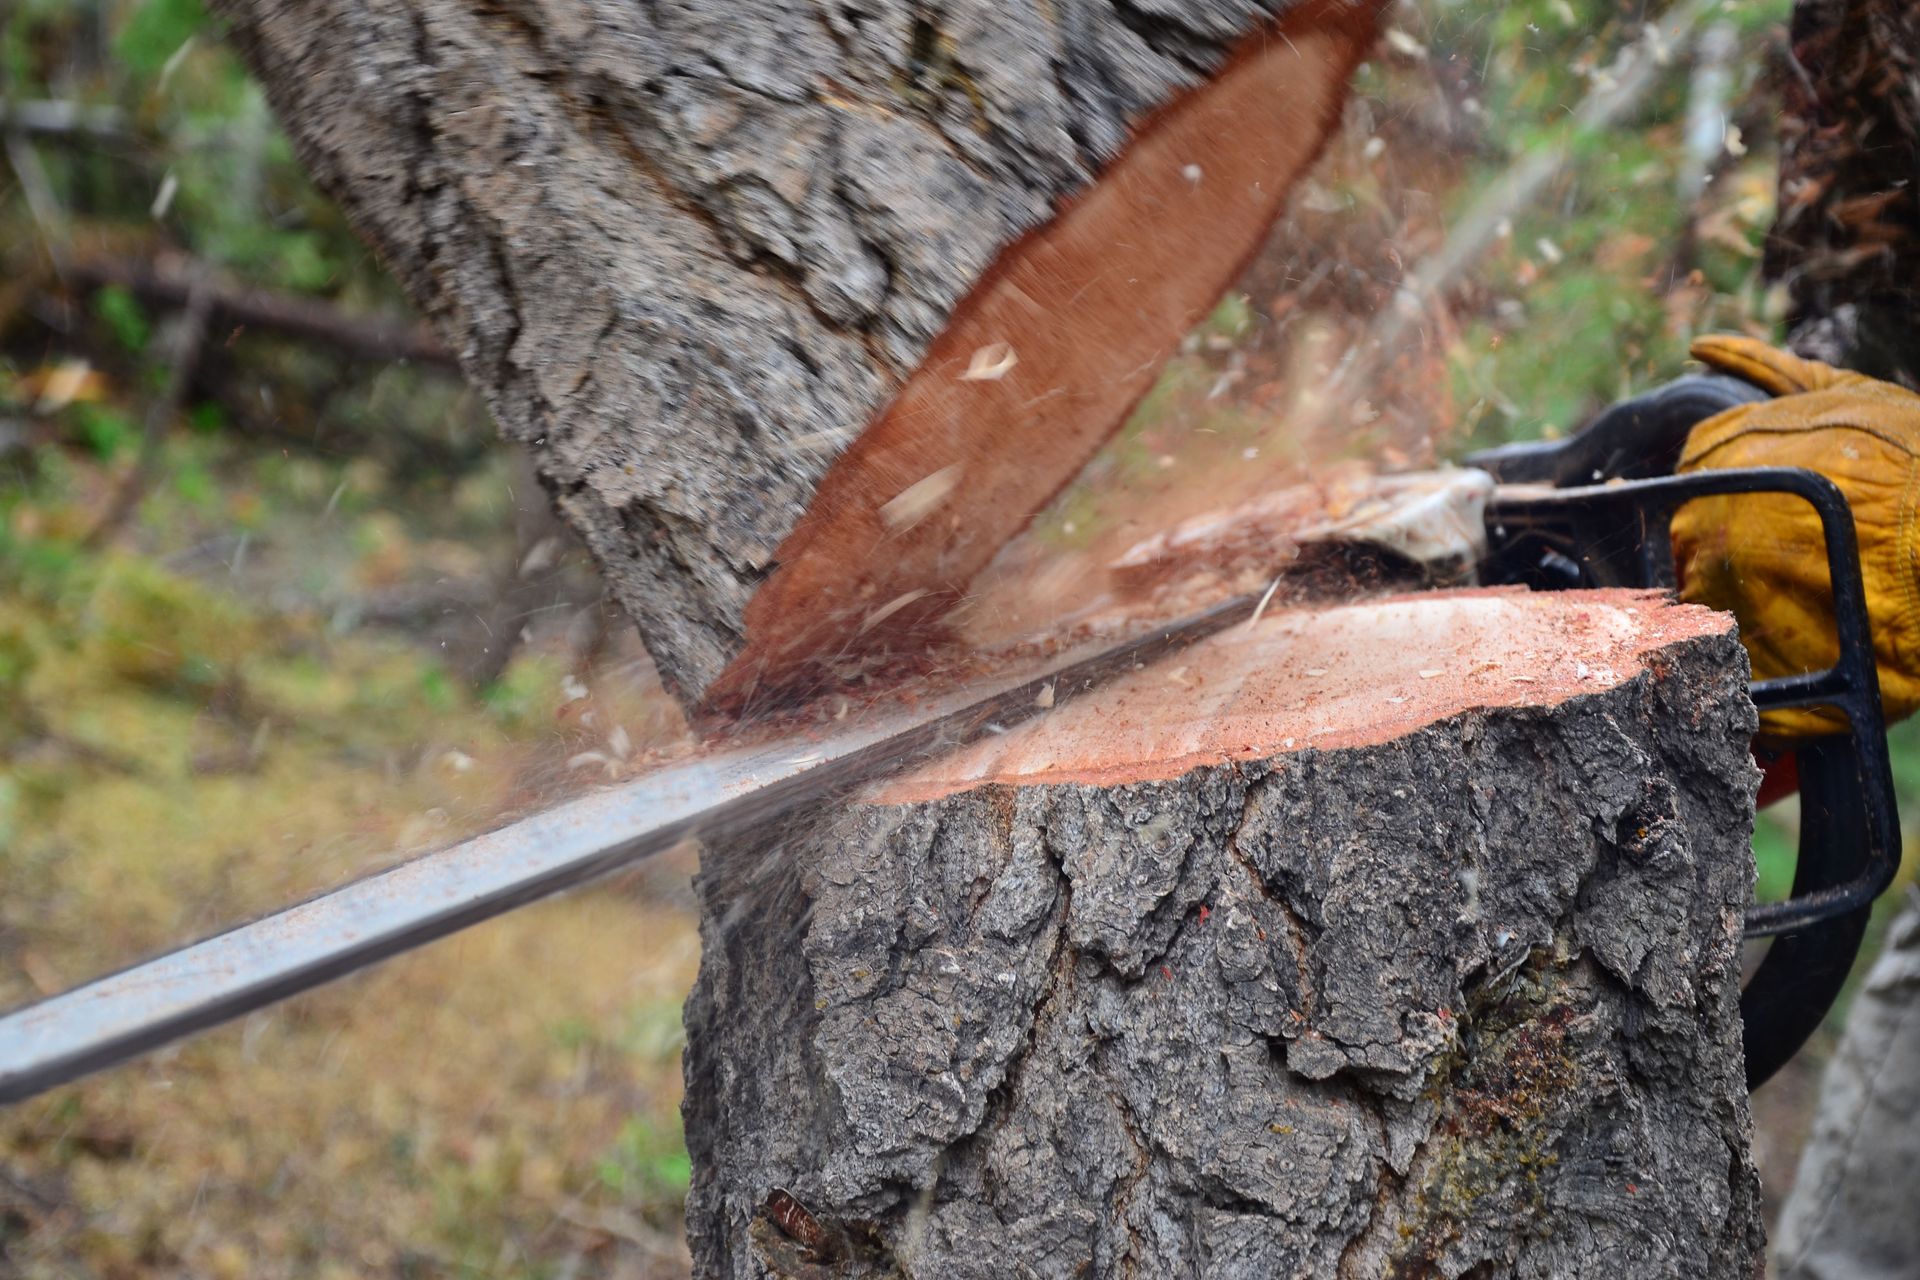 a person is cutting a tree with a chainsaw